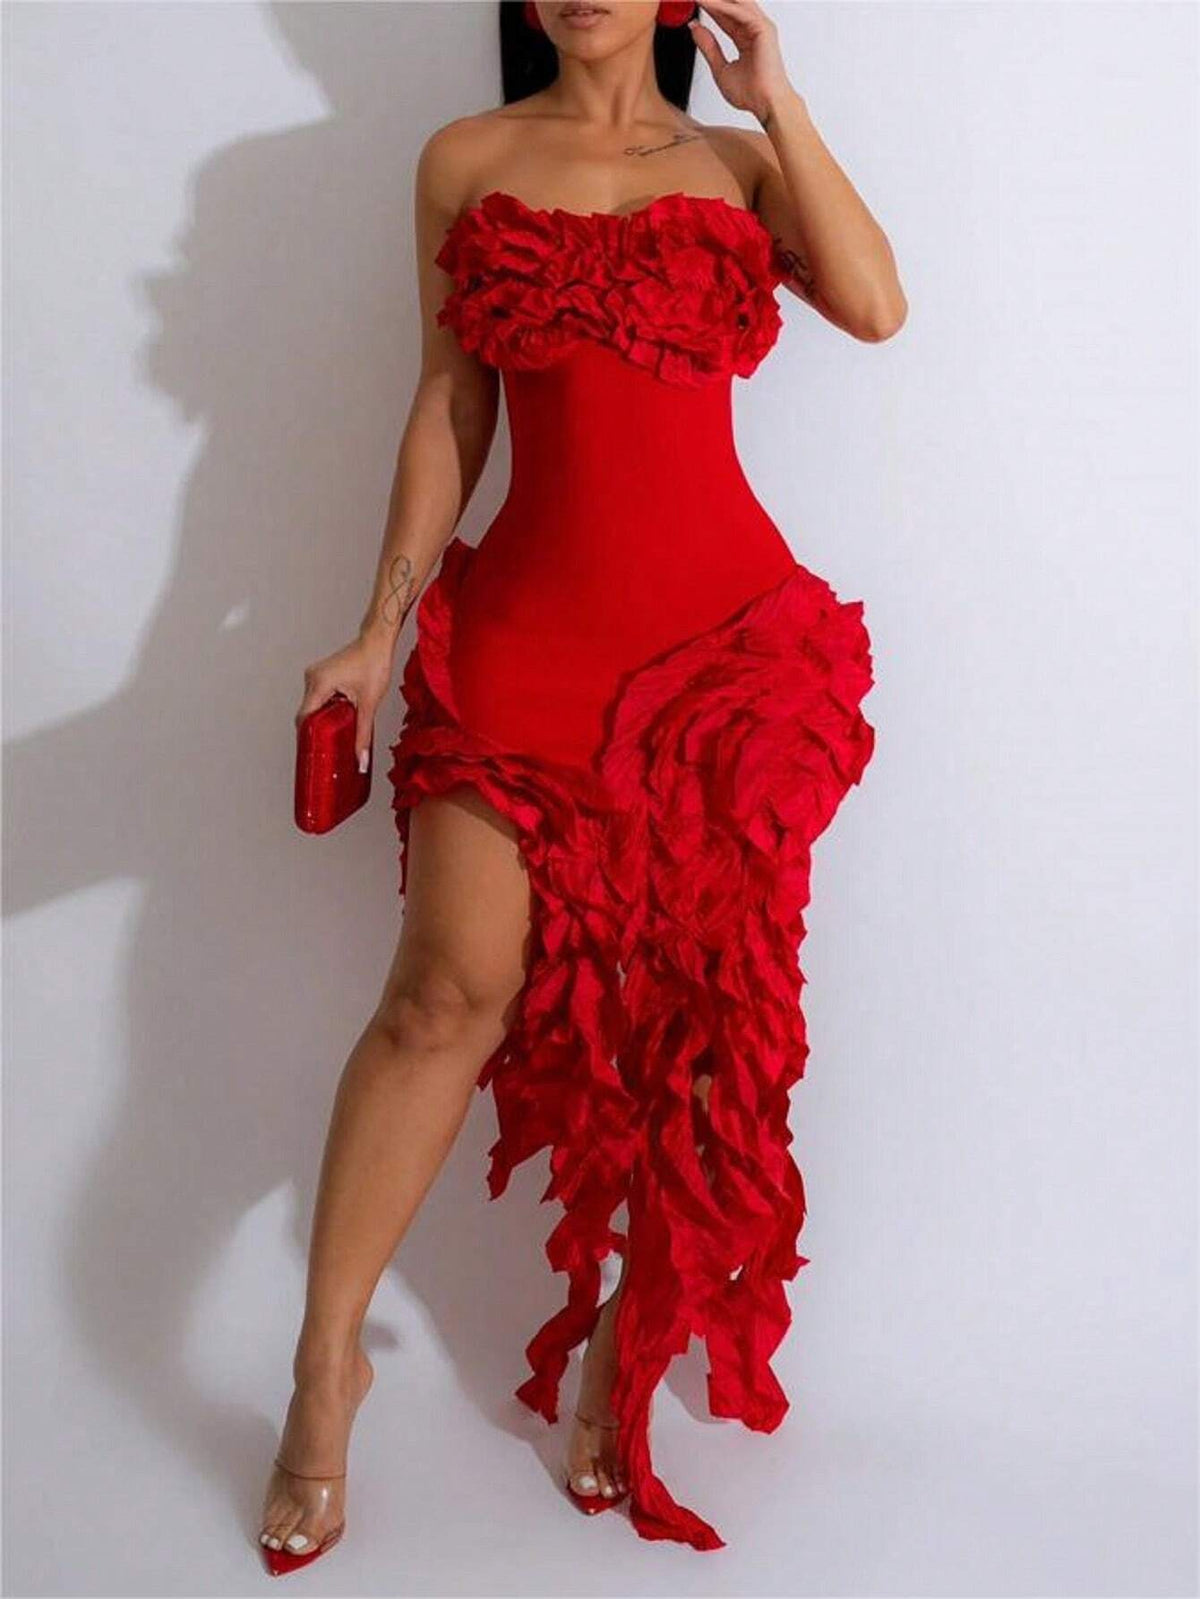 Women Sexy Strapless Irregular Fringed Solid Color Dress